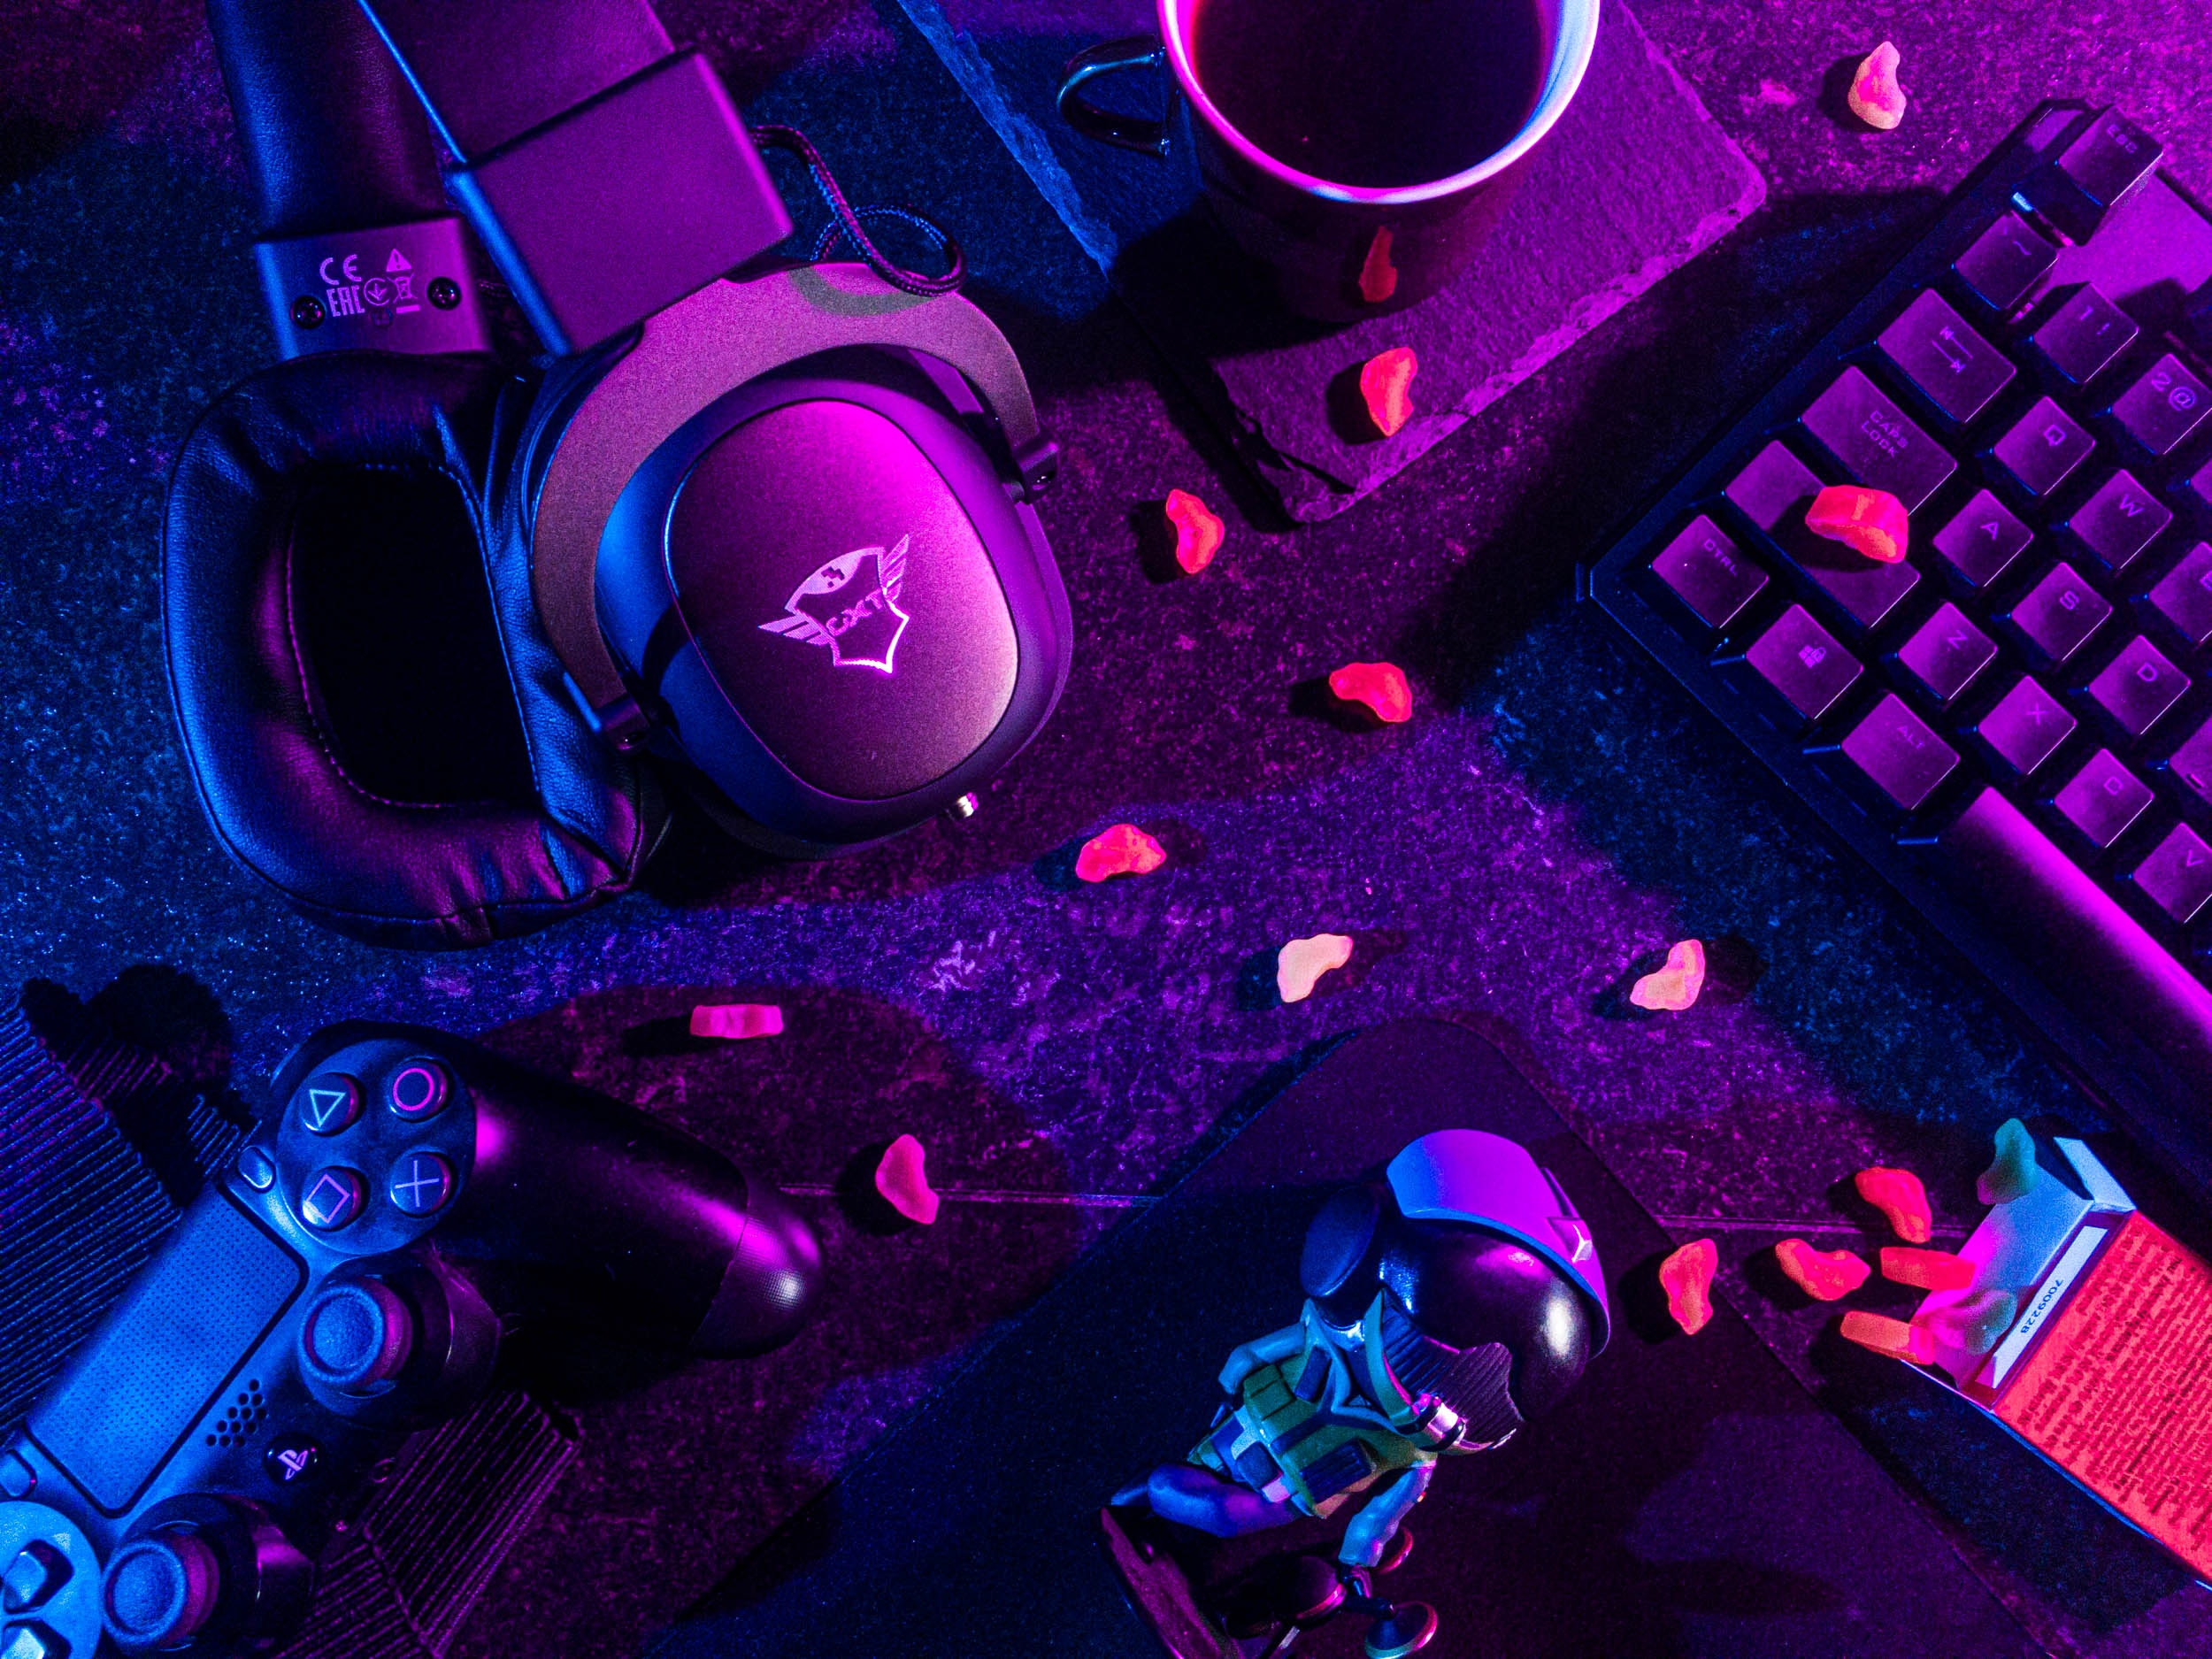 A picture of several pc peripherals laying on a table in a purple glow.